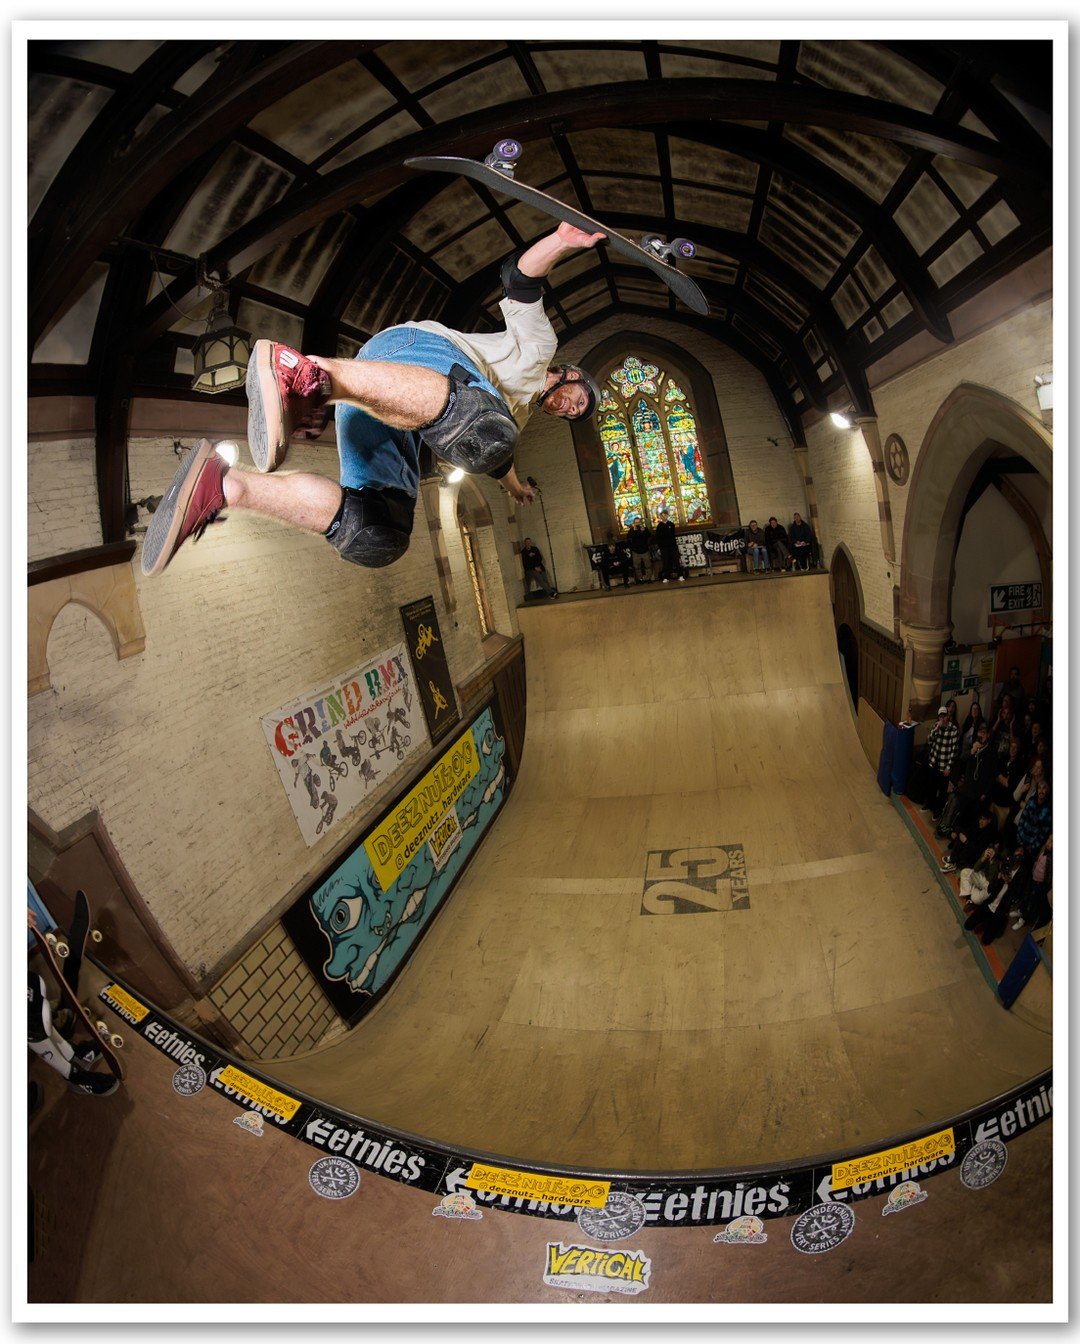 @_jessethomas with a Christ Air in an (old) church... at Round 1 of the @ukvertseries events for 2024 hosted by @skaterhamskatepark

He smashed his way to 1st place in the Pro/Am section

@verticalzine @triple8uk @rollersnakes @fpinsoles @fpinsolesuk